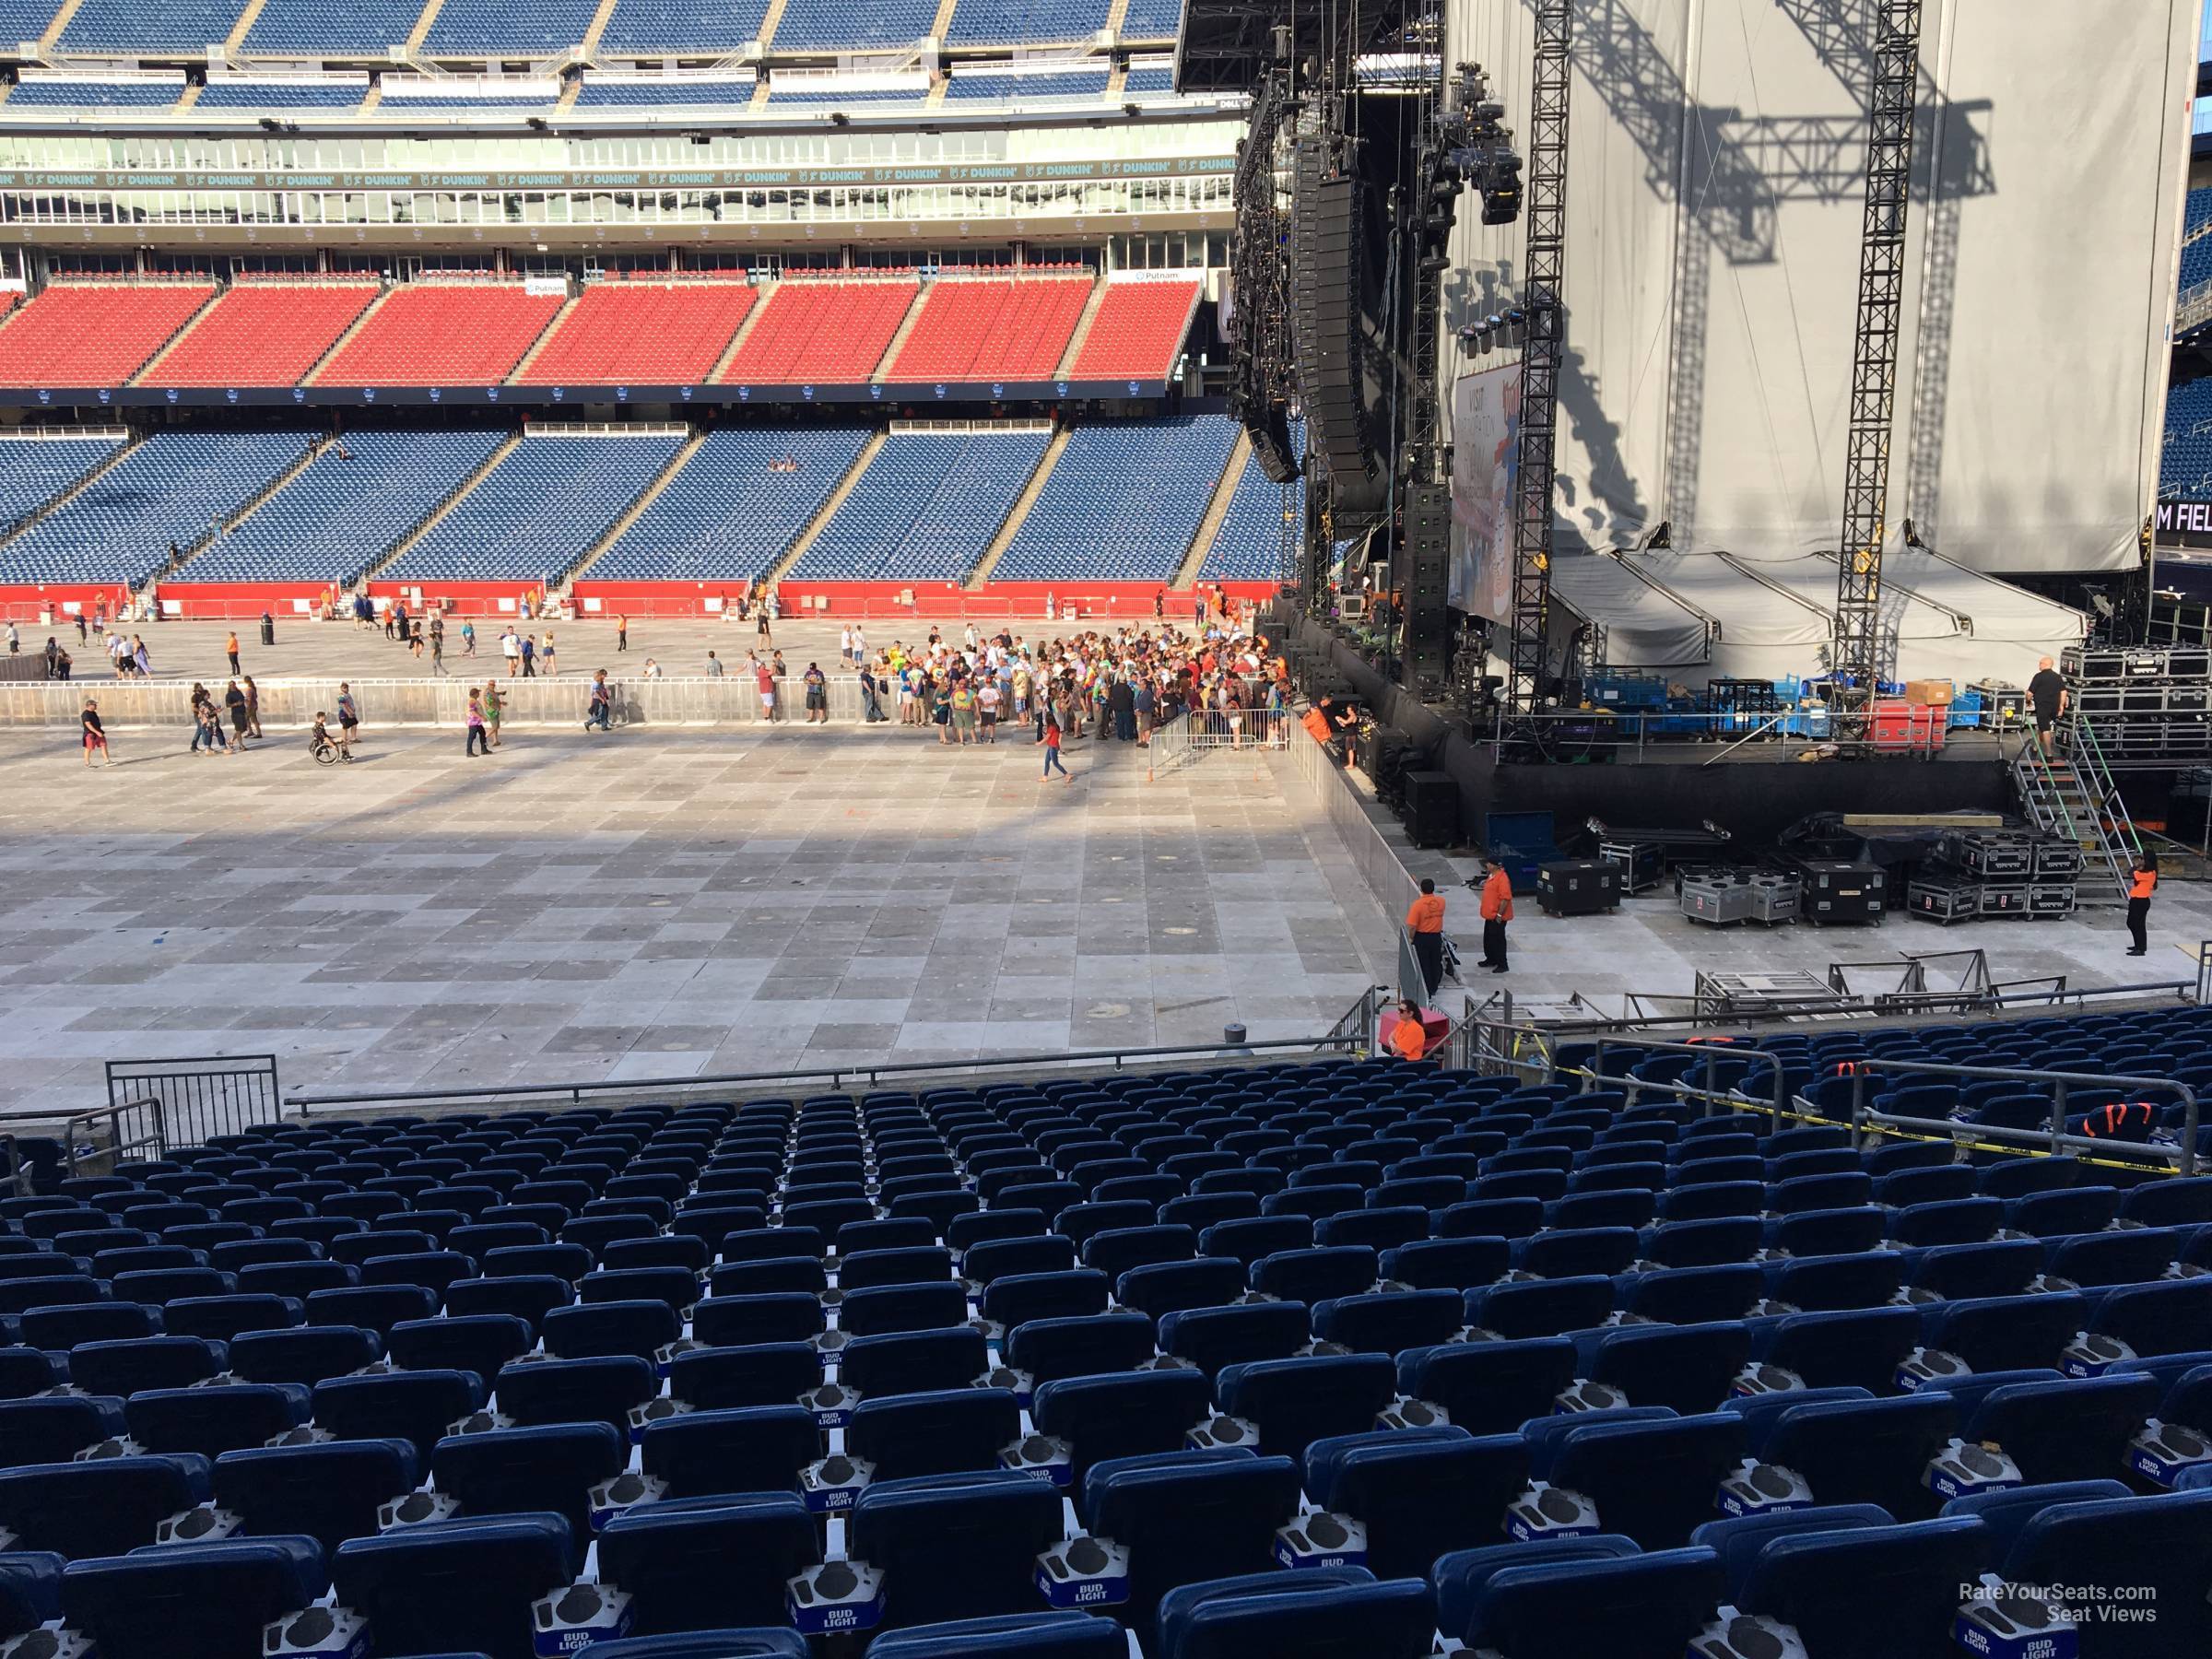 Section 128 at Gillette Stadium - RateYourSeats.com